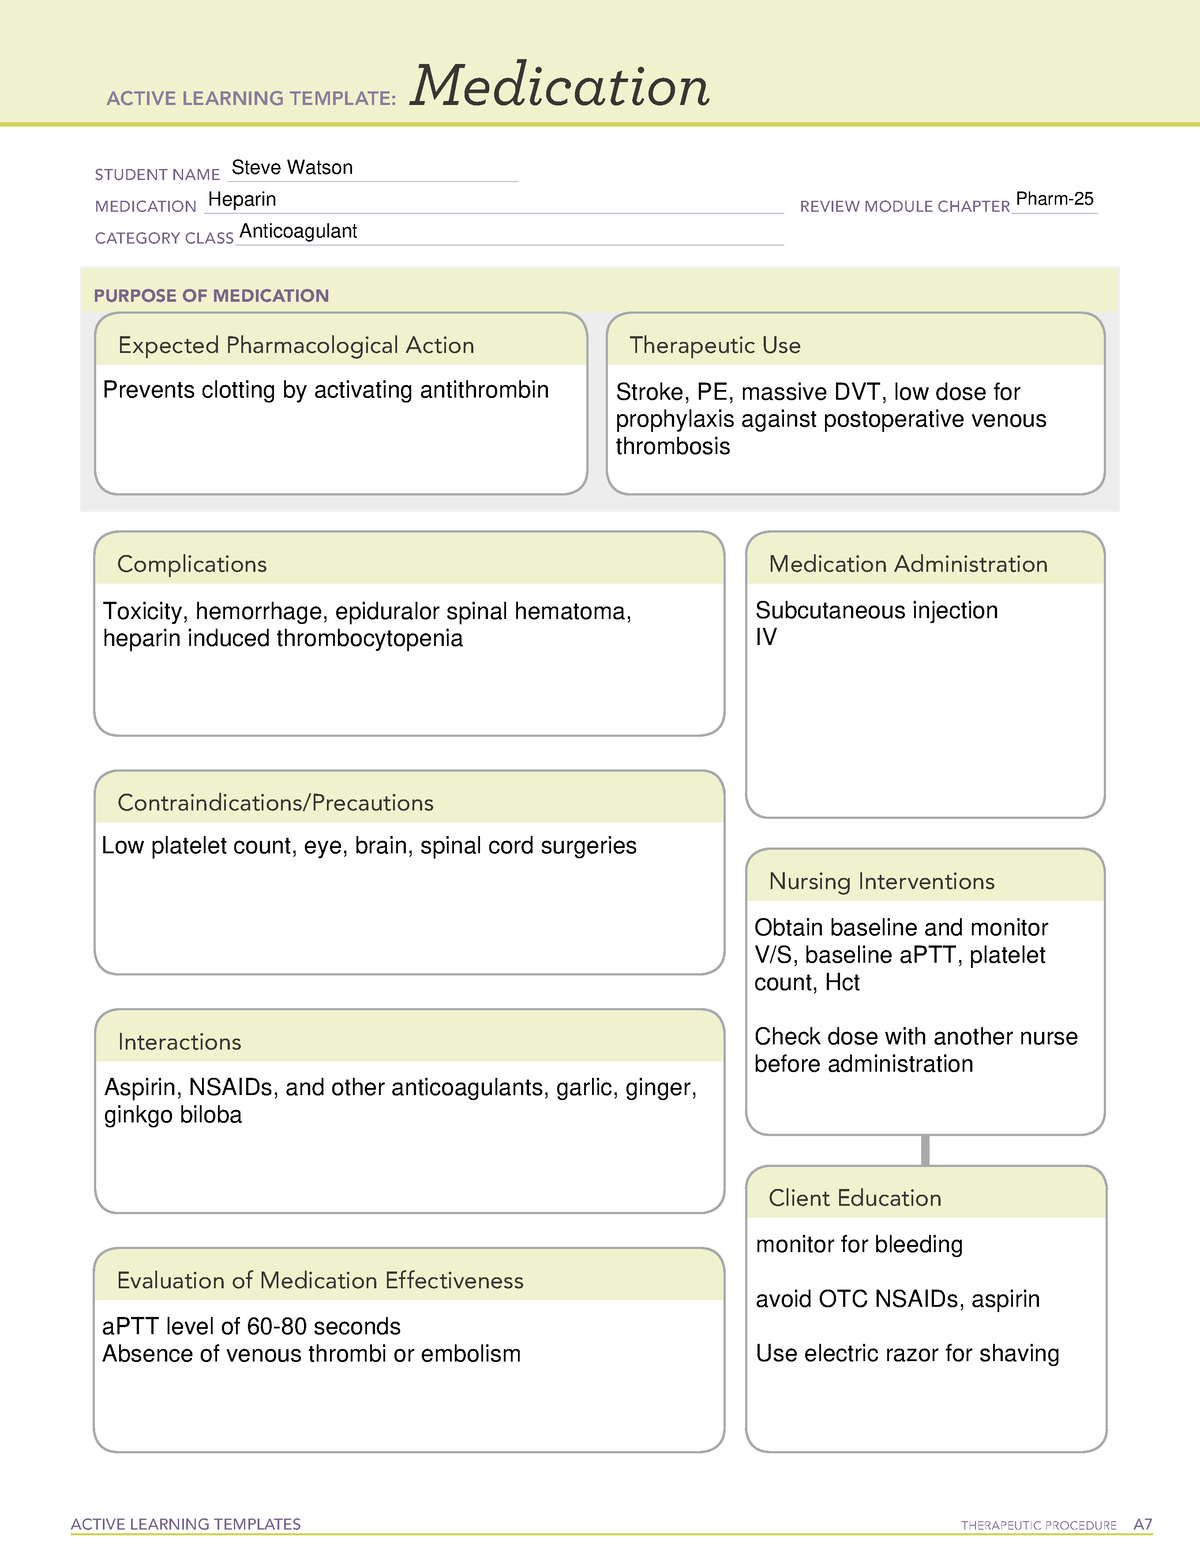 ATI medication template Heparin ACTIVE LEARNING TEMPLATES THERAPEUTIC